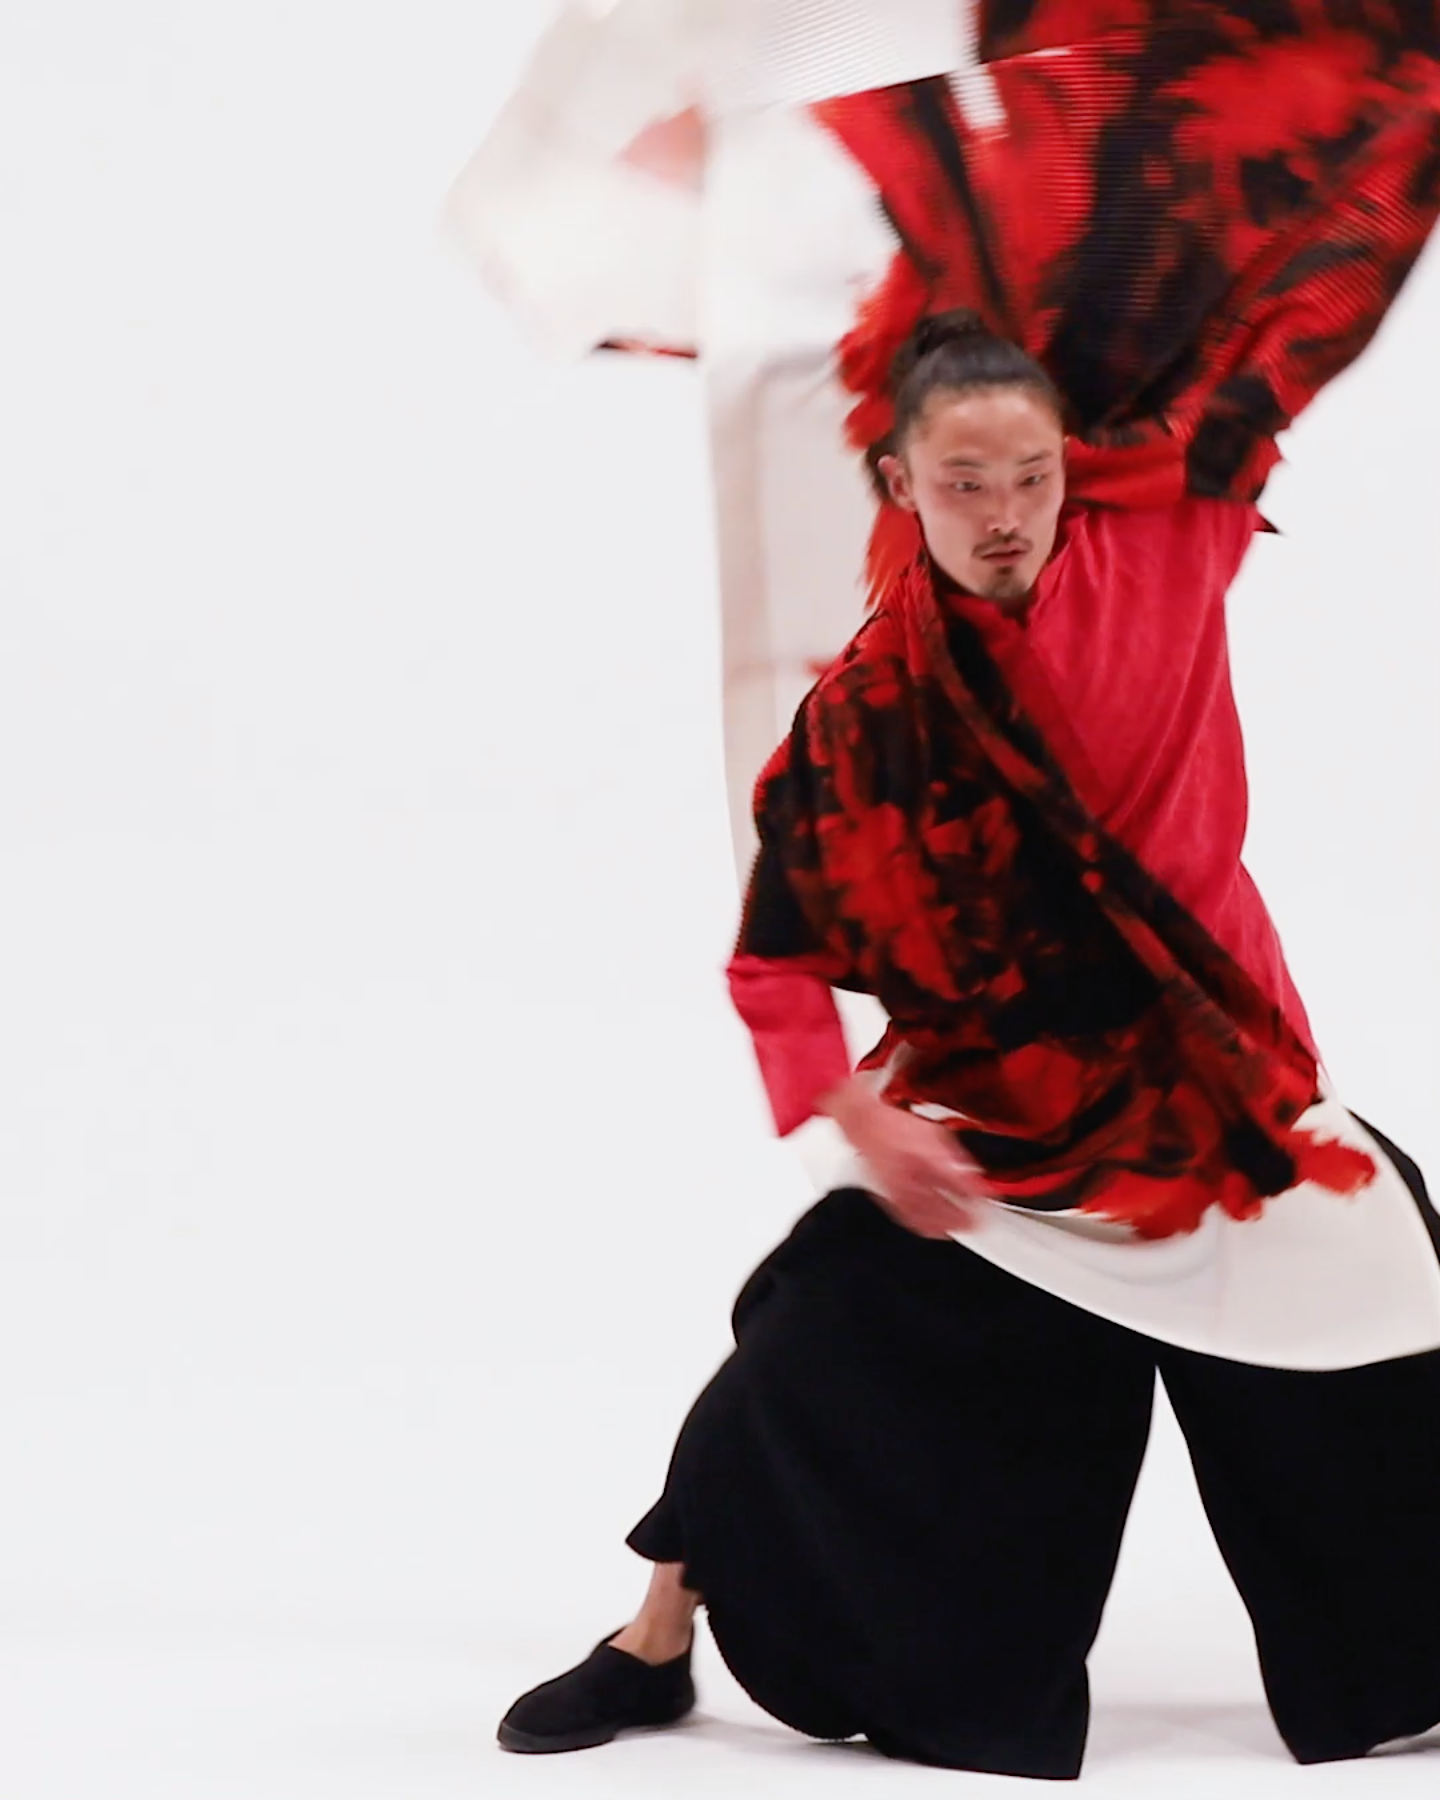 OBA】 HOMME PLISSÉ ISSEY MIYAKE「ACTION PAINTING」PV出演 – DOMO